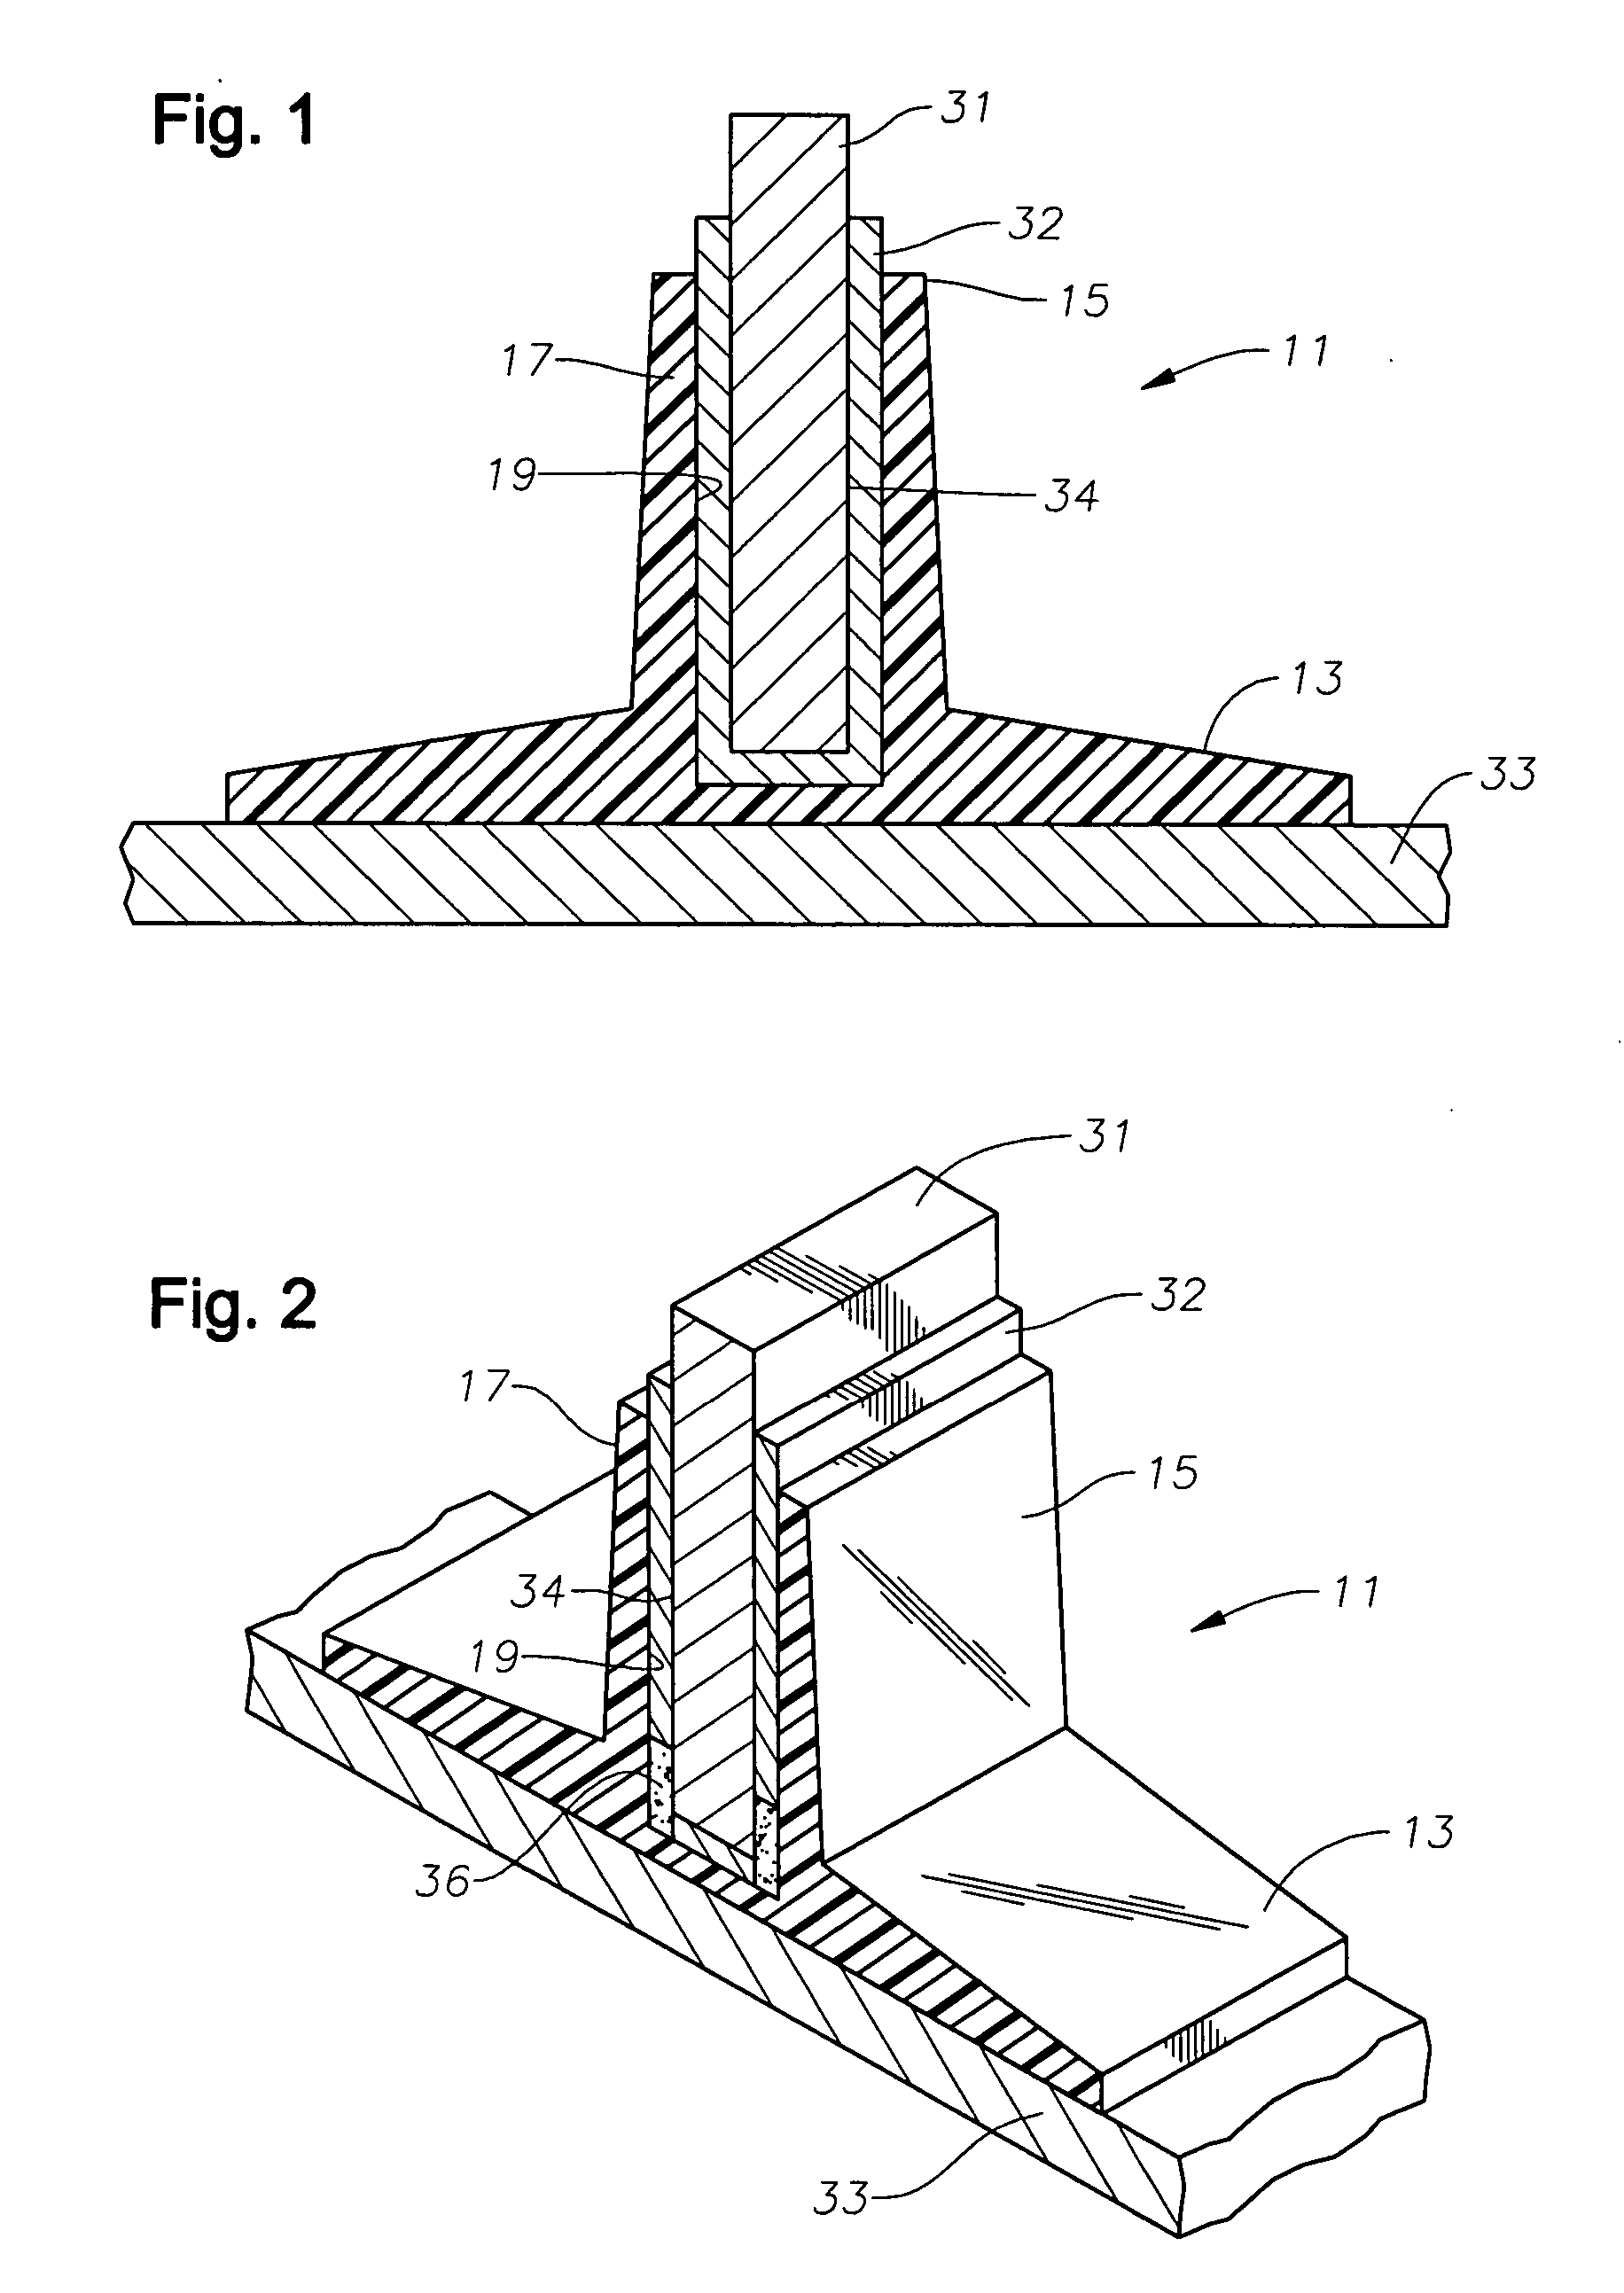 System, method, and apparatus for metallic-composite joint with compliant, non-corrosive interface